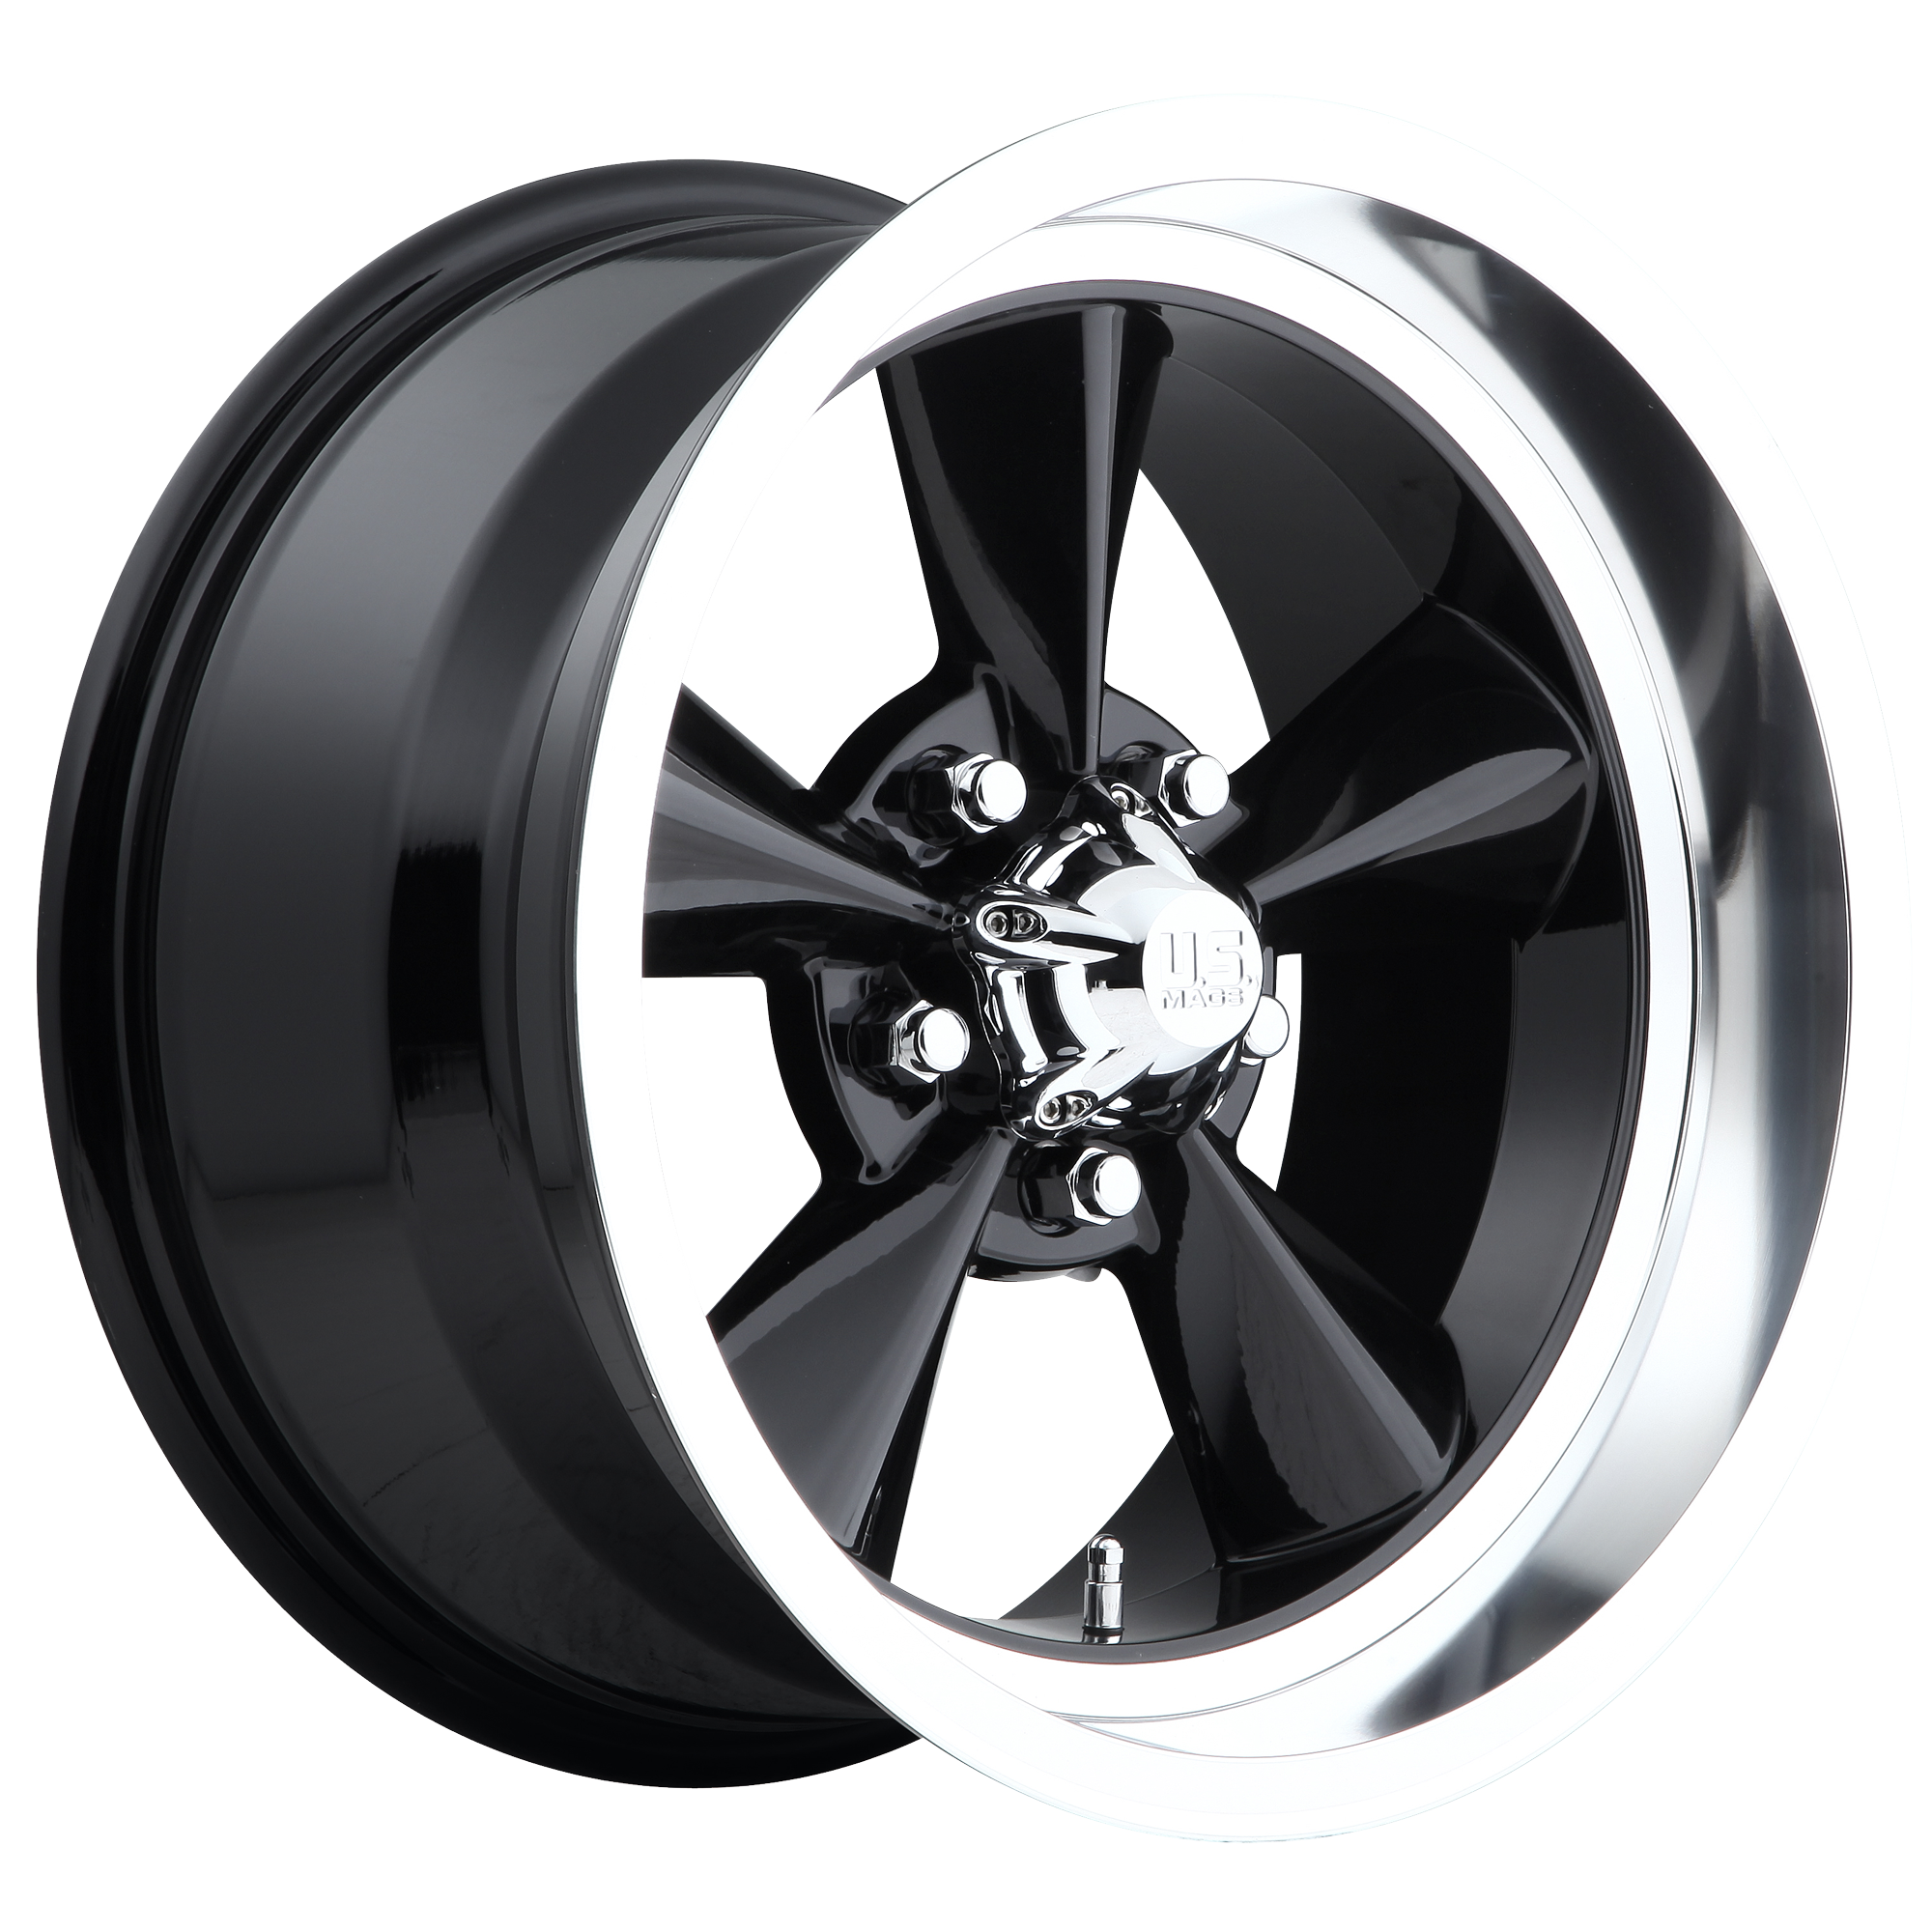 STANDARD 15x8 5x114.30 GLOSS BLACK (1 mm) - Tires and Engine Performance